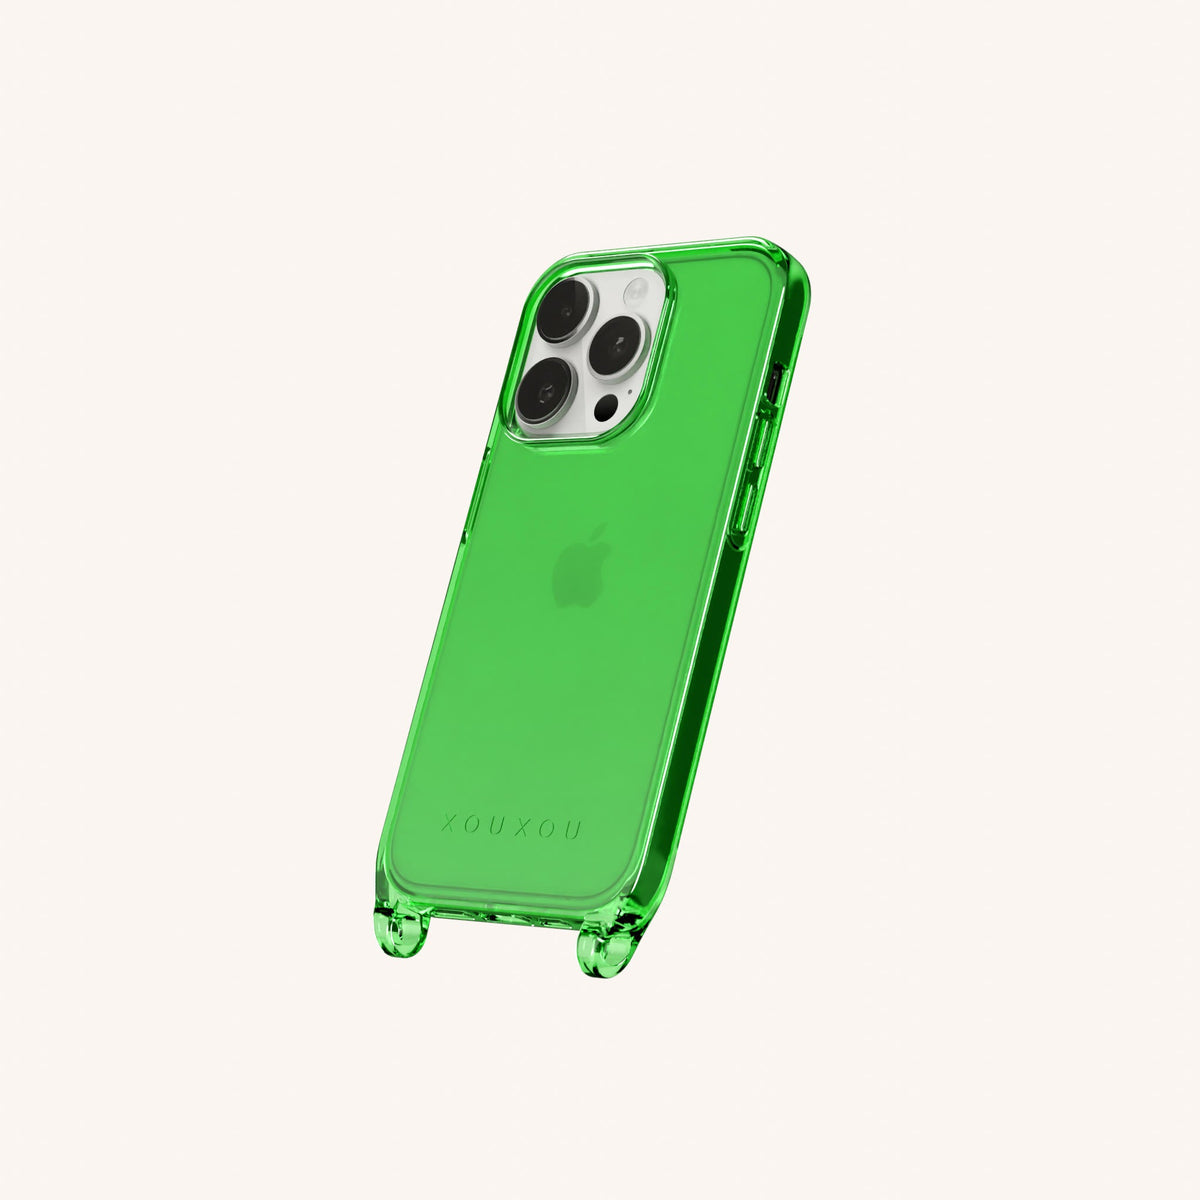 Phone Case with Eyelets for iPhone 14 Pro without MagSafe in Neon Green Clear Perspective View | XOUXOU #phone model_iphone 14 pro